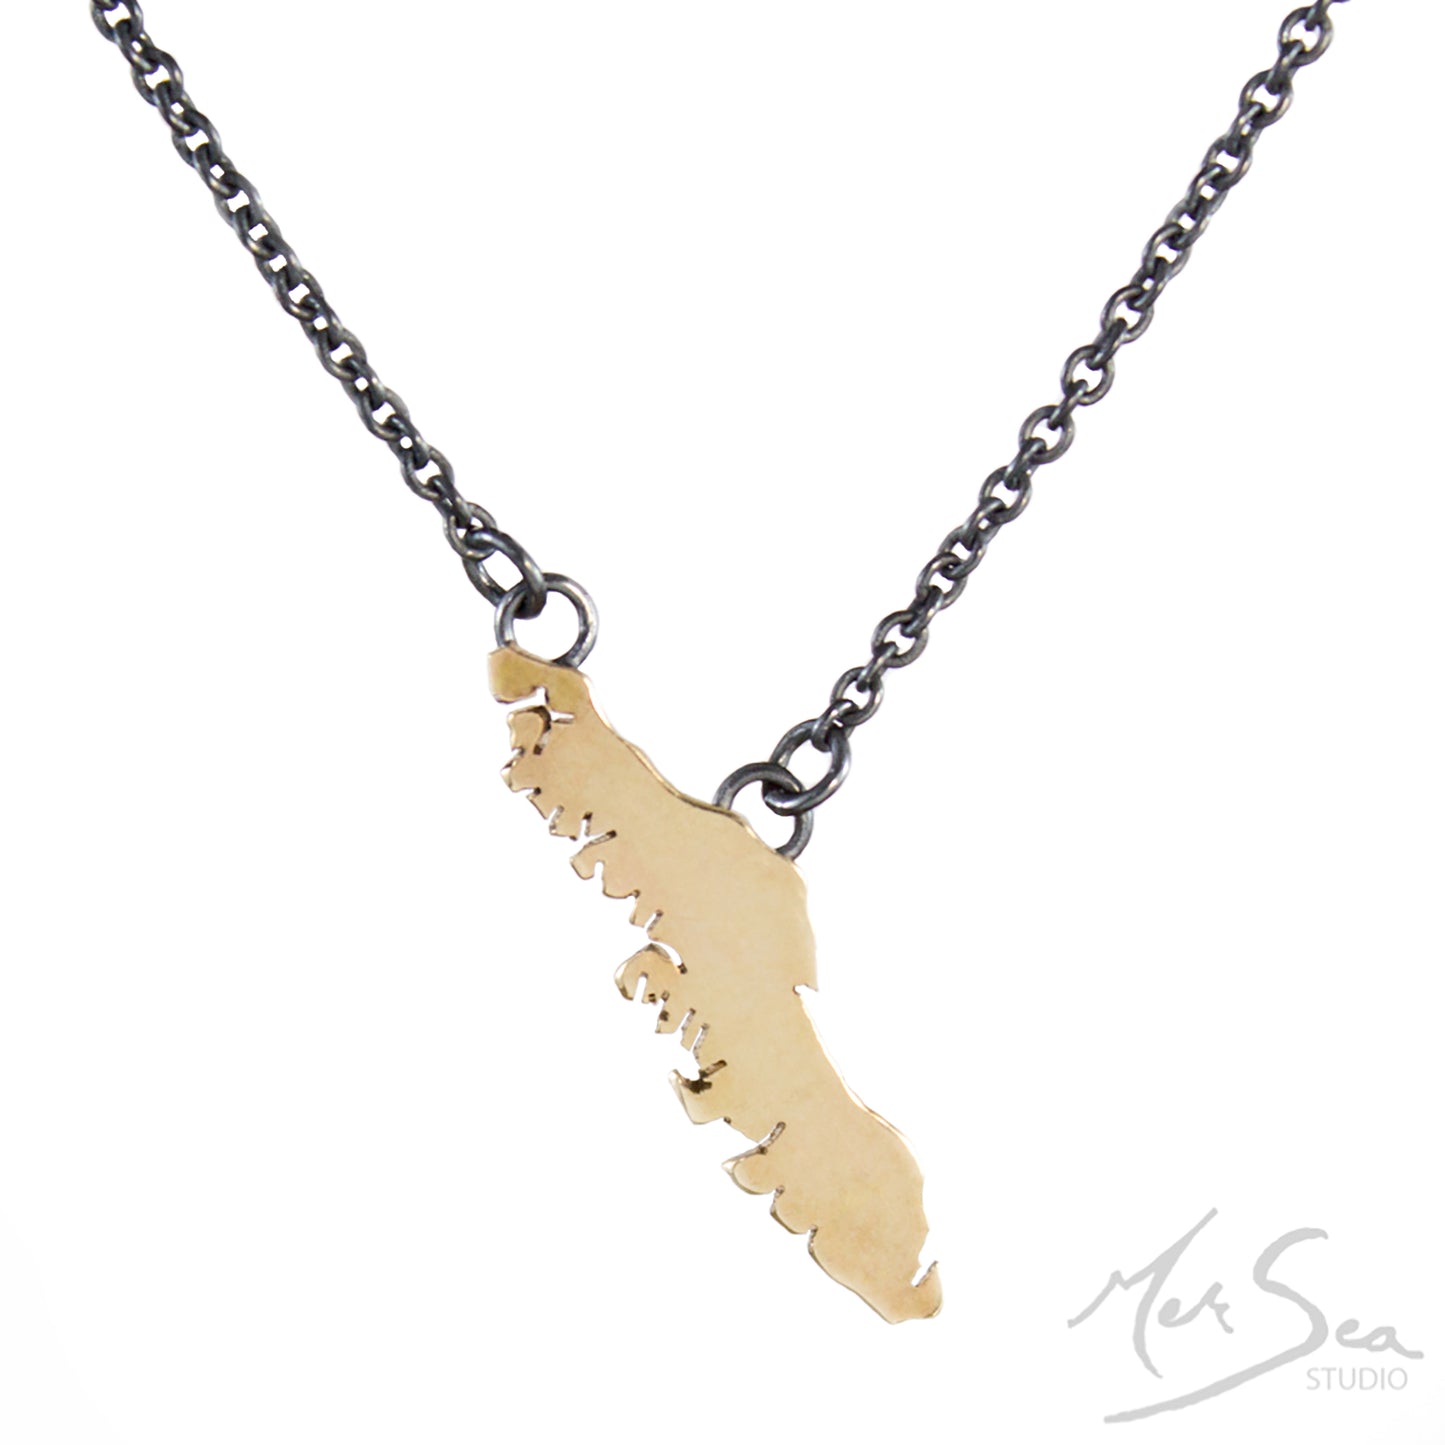 Vancouver Island in 14K Gold